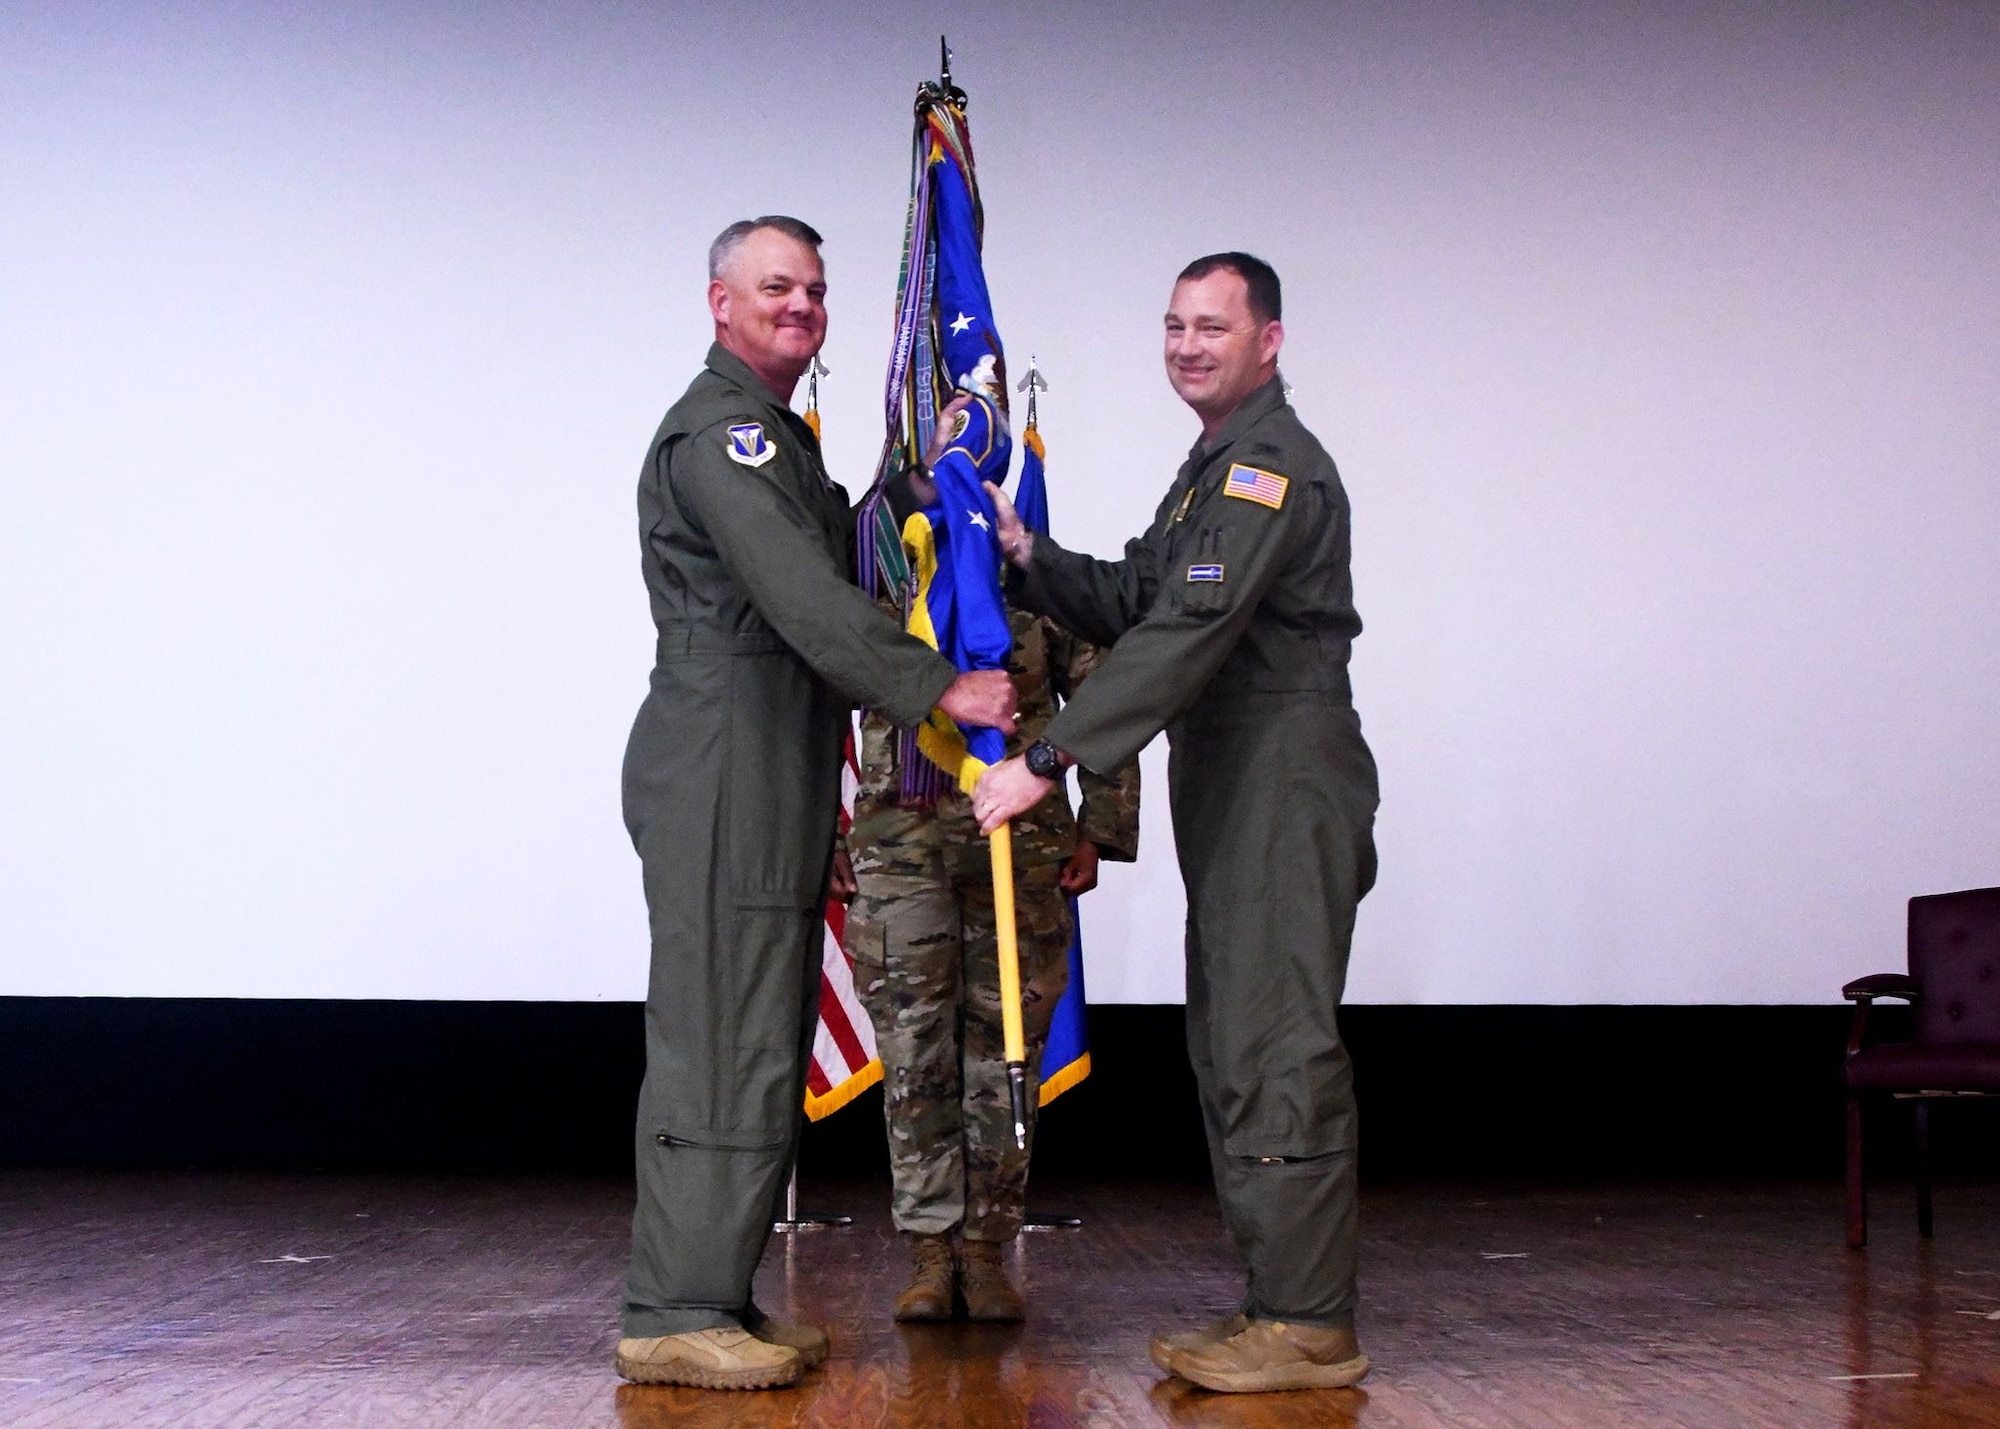 Col. Corey Reed, 459th Air Refueling Wing Commander (Right), assumed command of the 459th Air Refueling Wing during his assumption of command ceremony held at Joint Base Andrews, Md. As the commander, Col. Reed will support and direct more than 1,200 military and civilian personnel in 20 units and have control of eight KC-135R Stratotanker aircraft. The Fourth Air Force Commander, Brigadier General Scott Durham, was the presiding official.